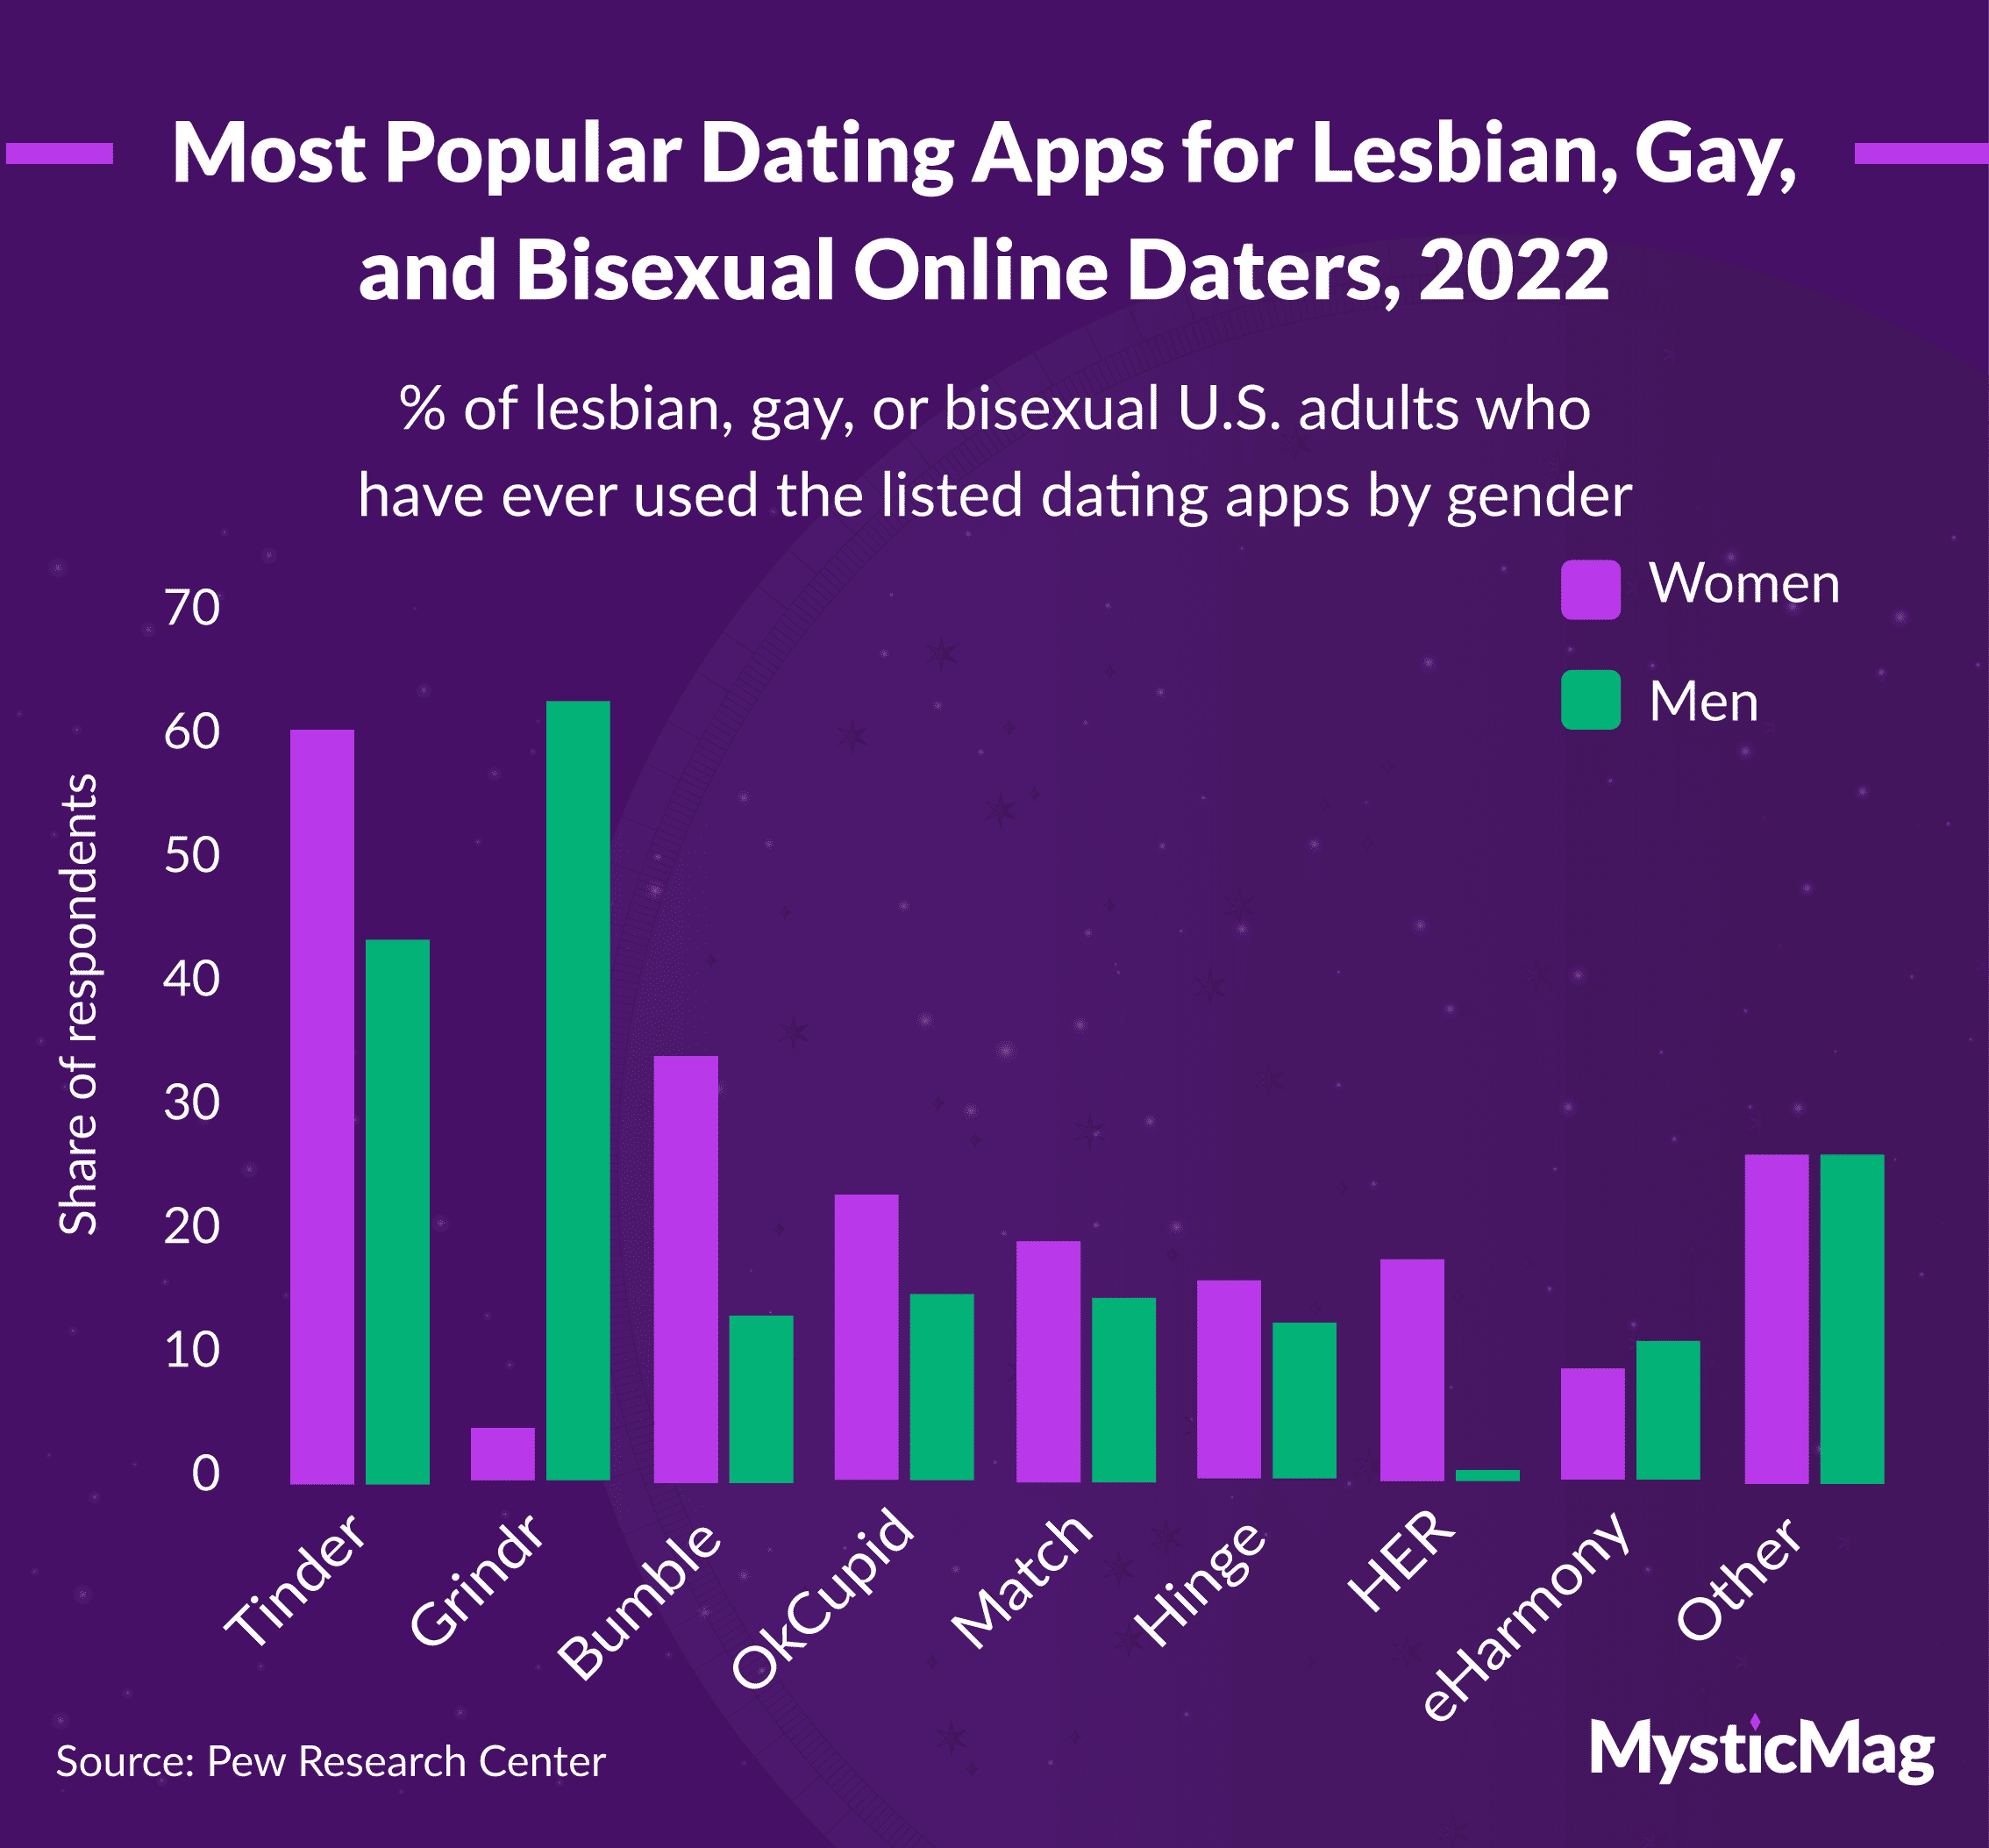 Most popular dating apps for LGB users, 2022